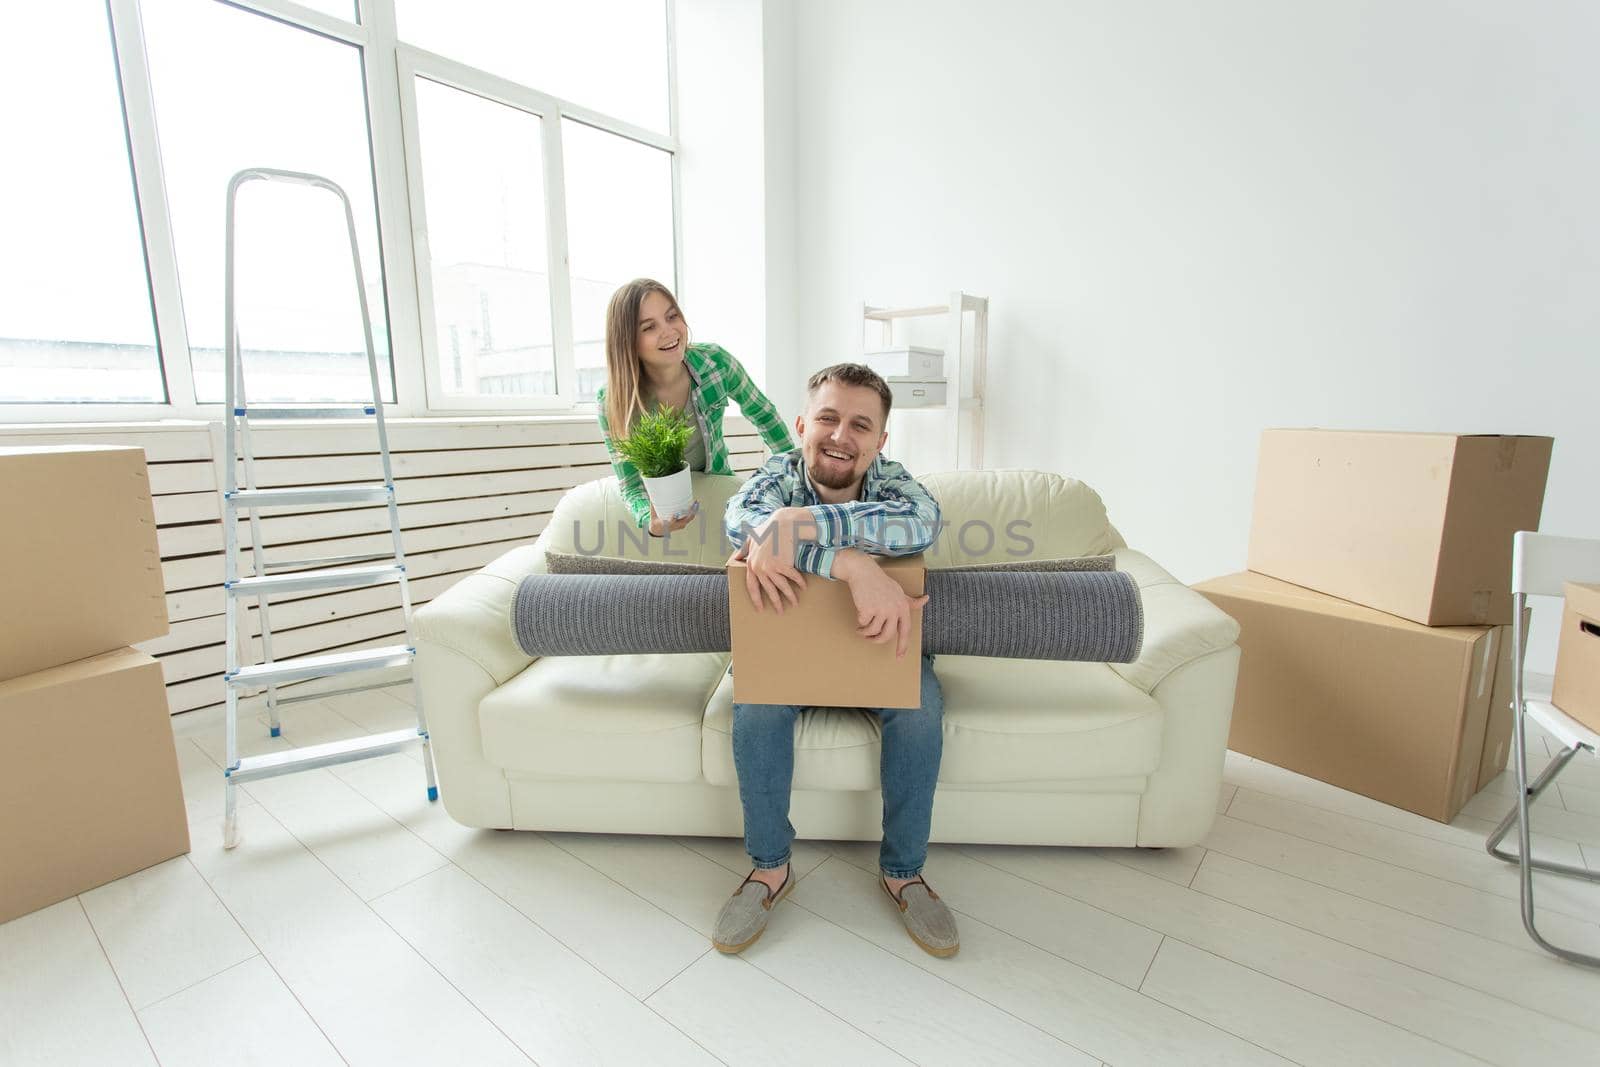 Cheerful young couple rejoices in moving to a new home laying out their belongings in the living room. Concept of housewarming and mortgages for a young family by Satura86